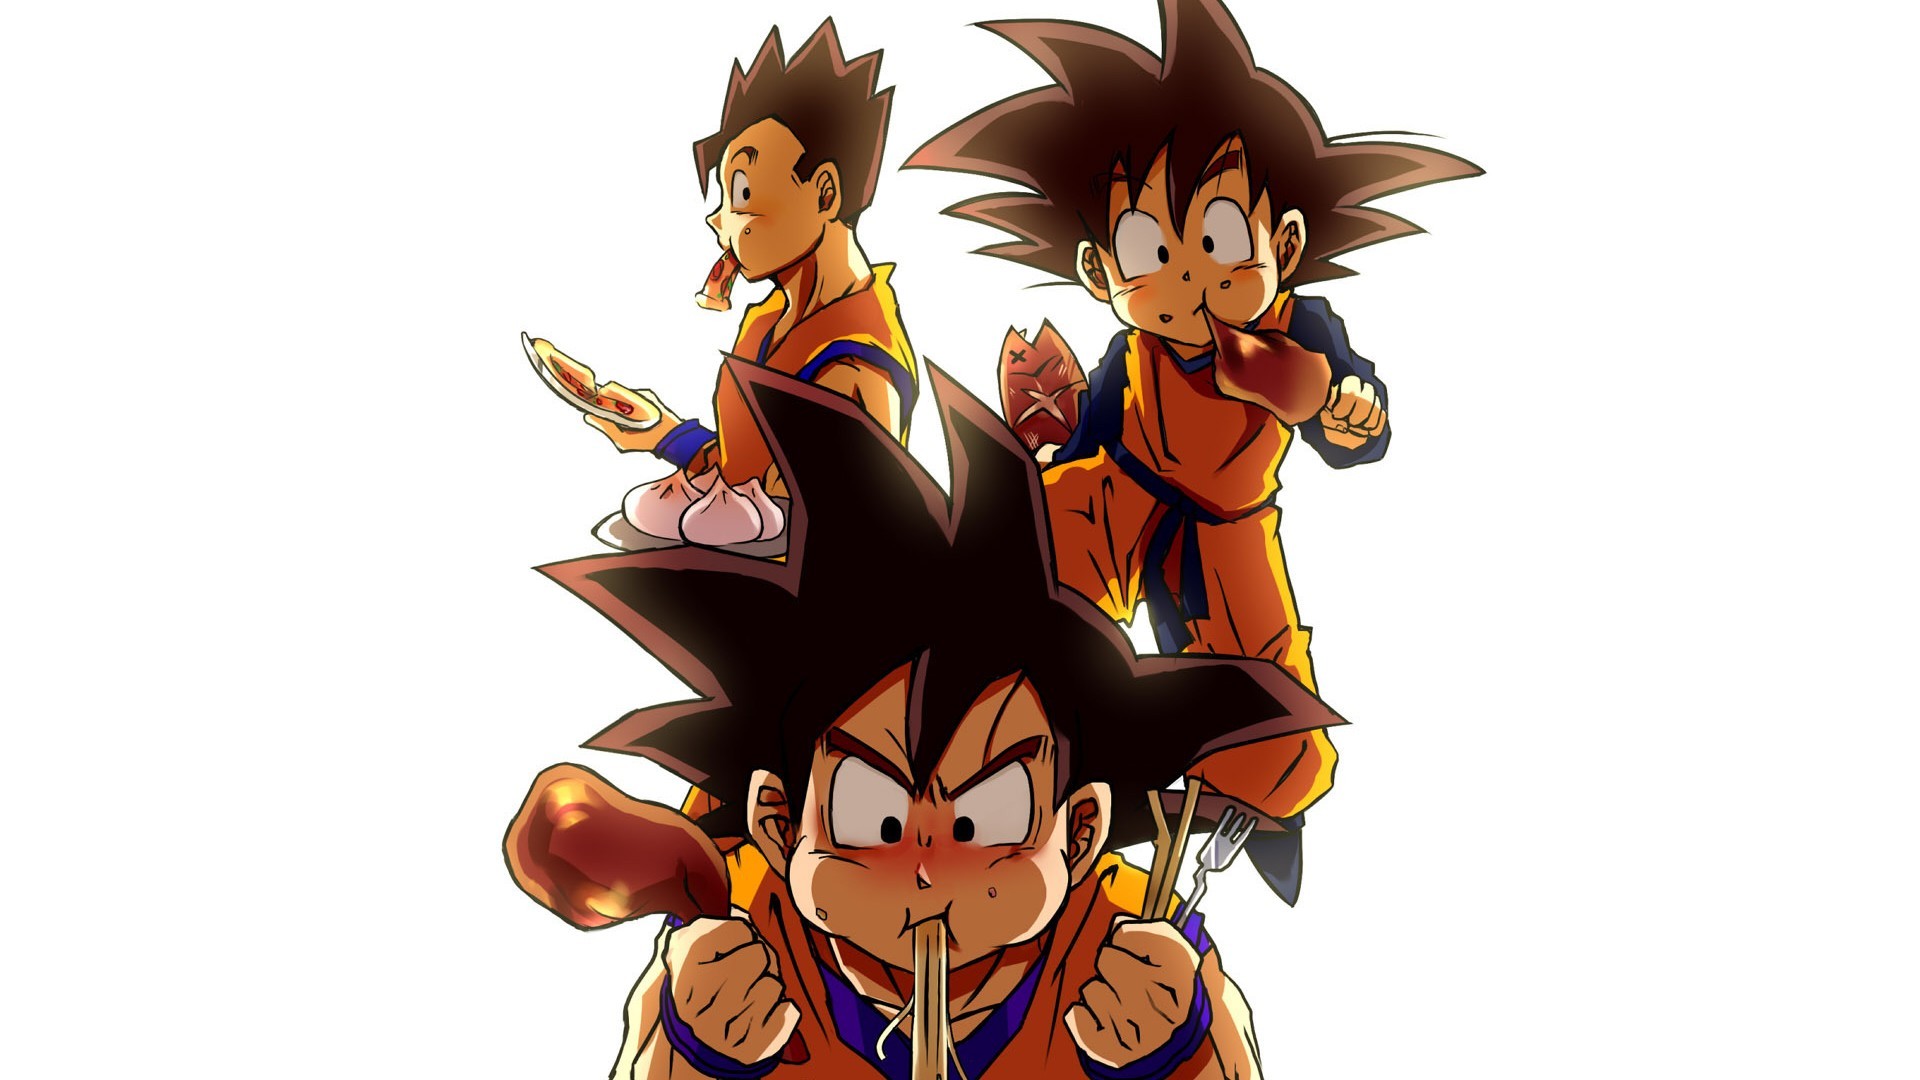 Kid Goku Wallpaper For Desktop with image resolution 1920x1080 pixel. You can use this wallpaper as background for your desktop Computer Screensavers, Android or iPhone smartphones